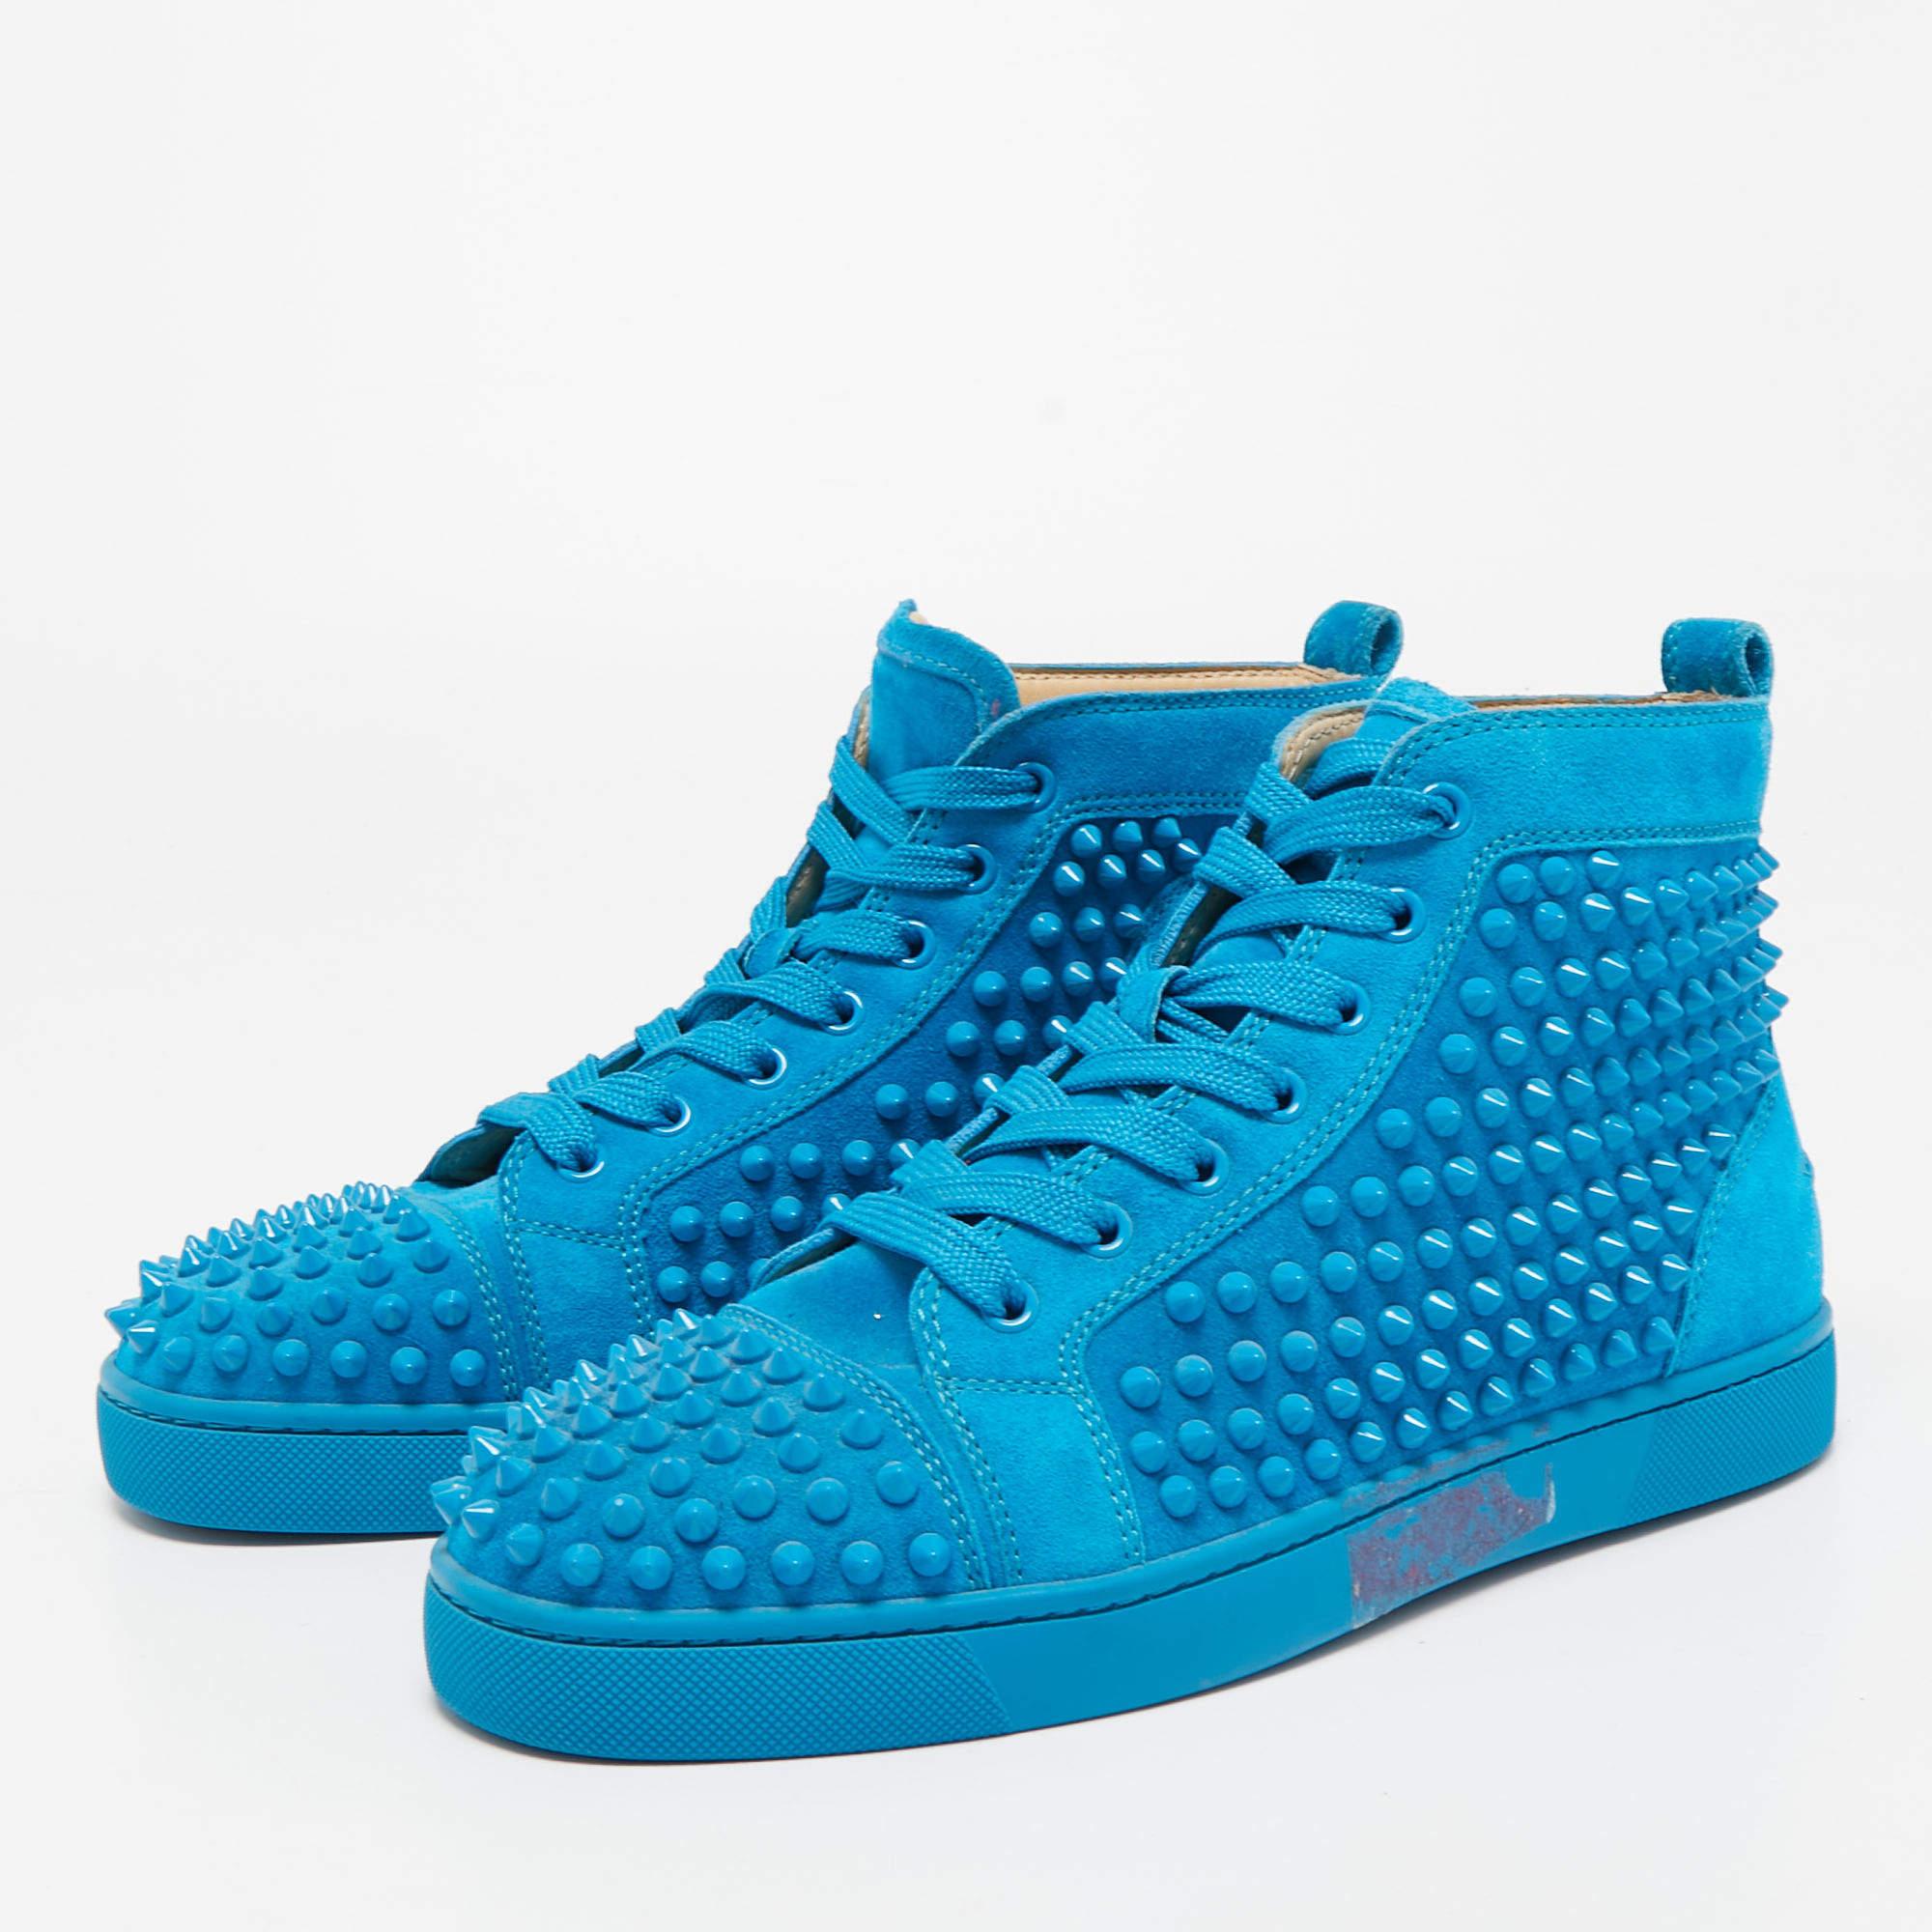 The Christian Louboutin sneakers combine luxurious craftsmanship with edgy details. Made from premium blue suede, these high-top sneakers feature signature spike embellishments on the toe cap and sides, adding a touch of rebellious sophistication.